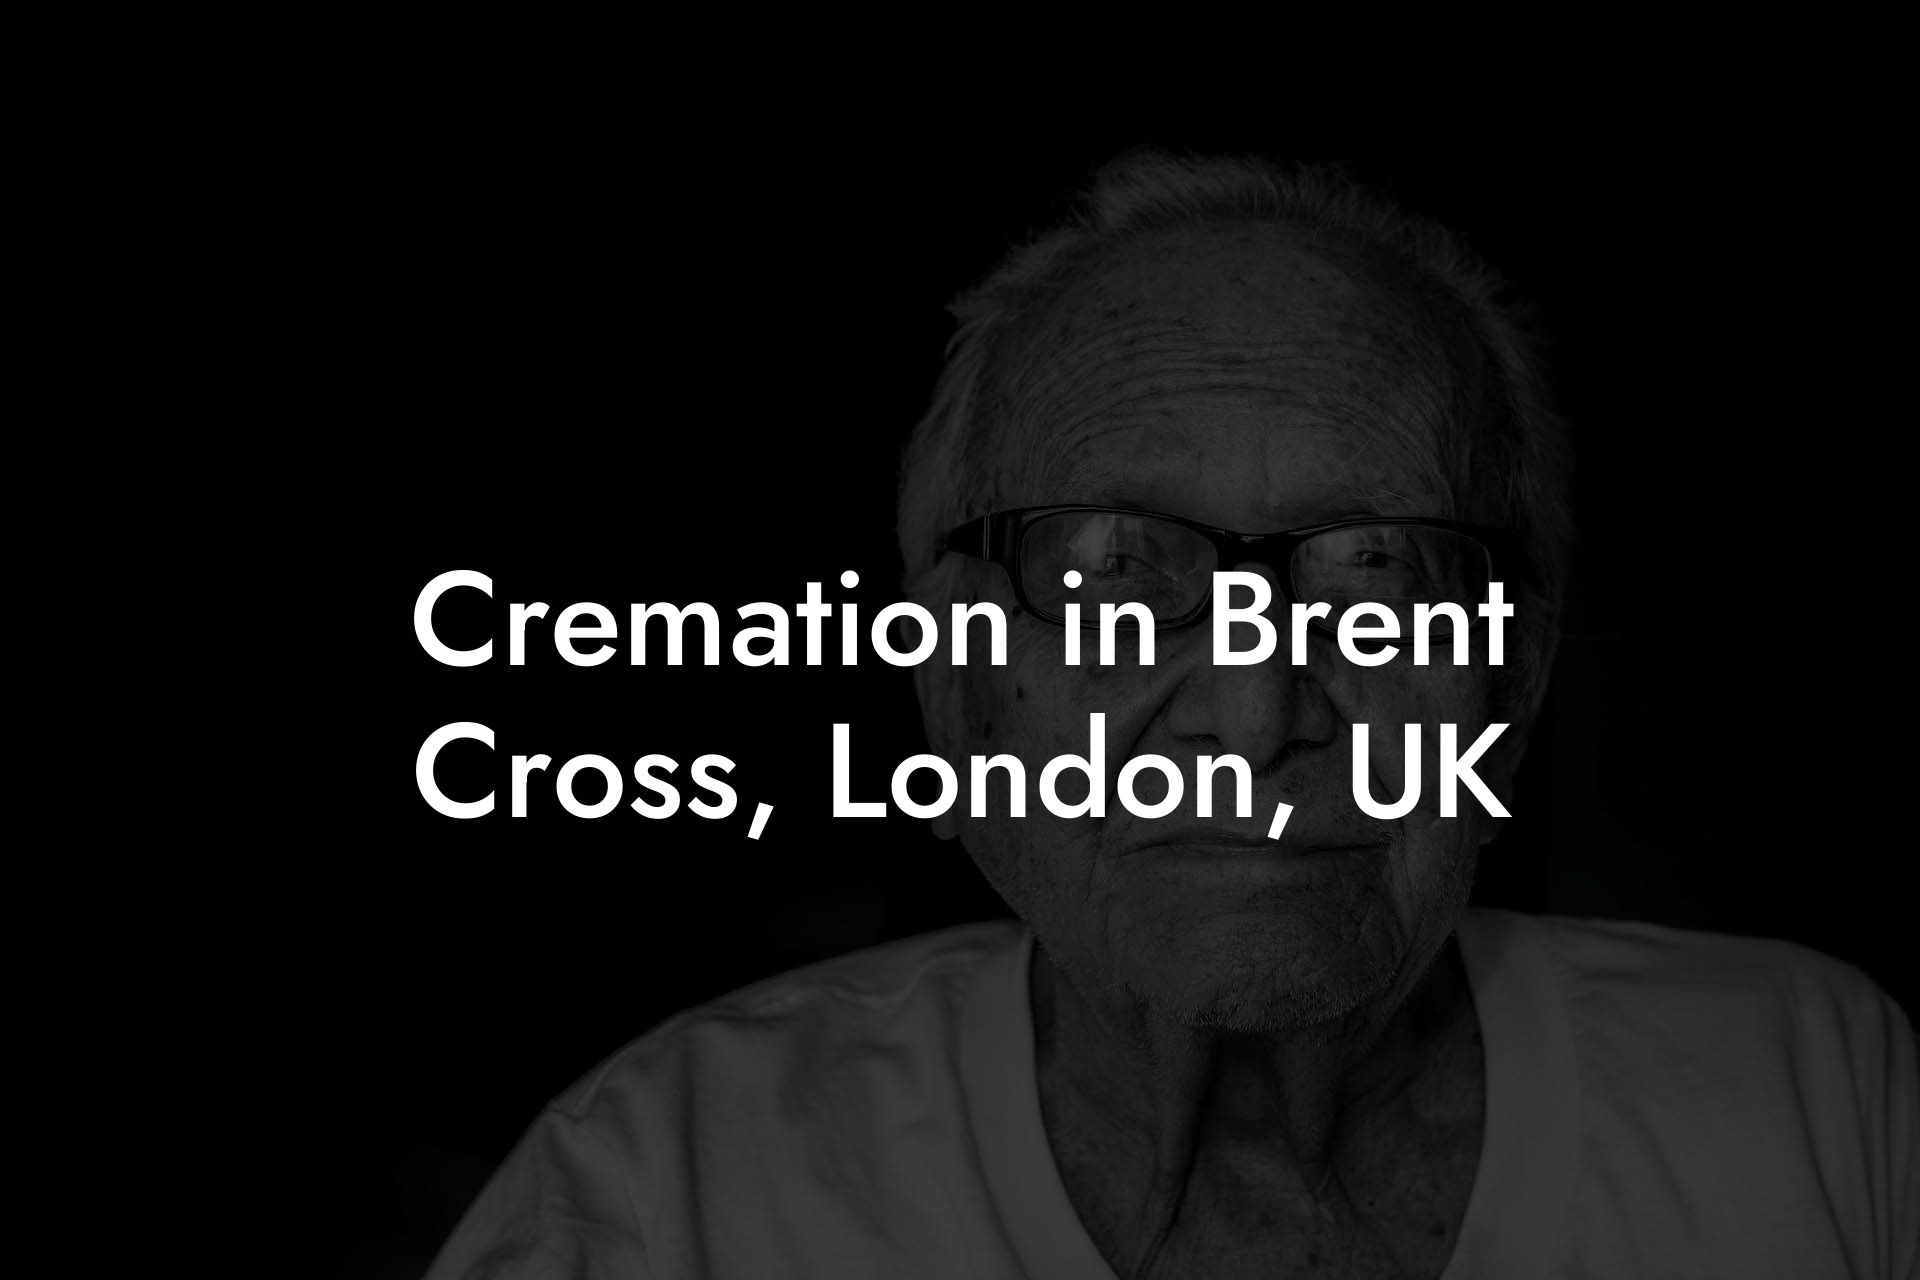 Cremation in Brent Cross, London, UK